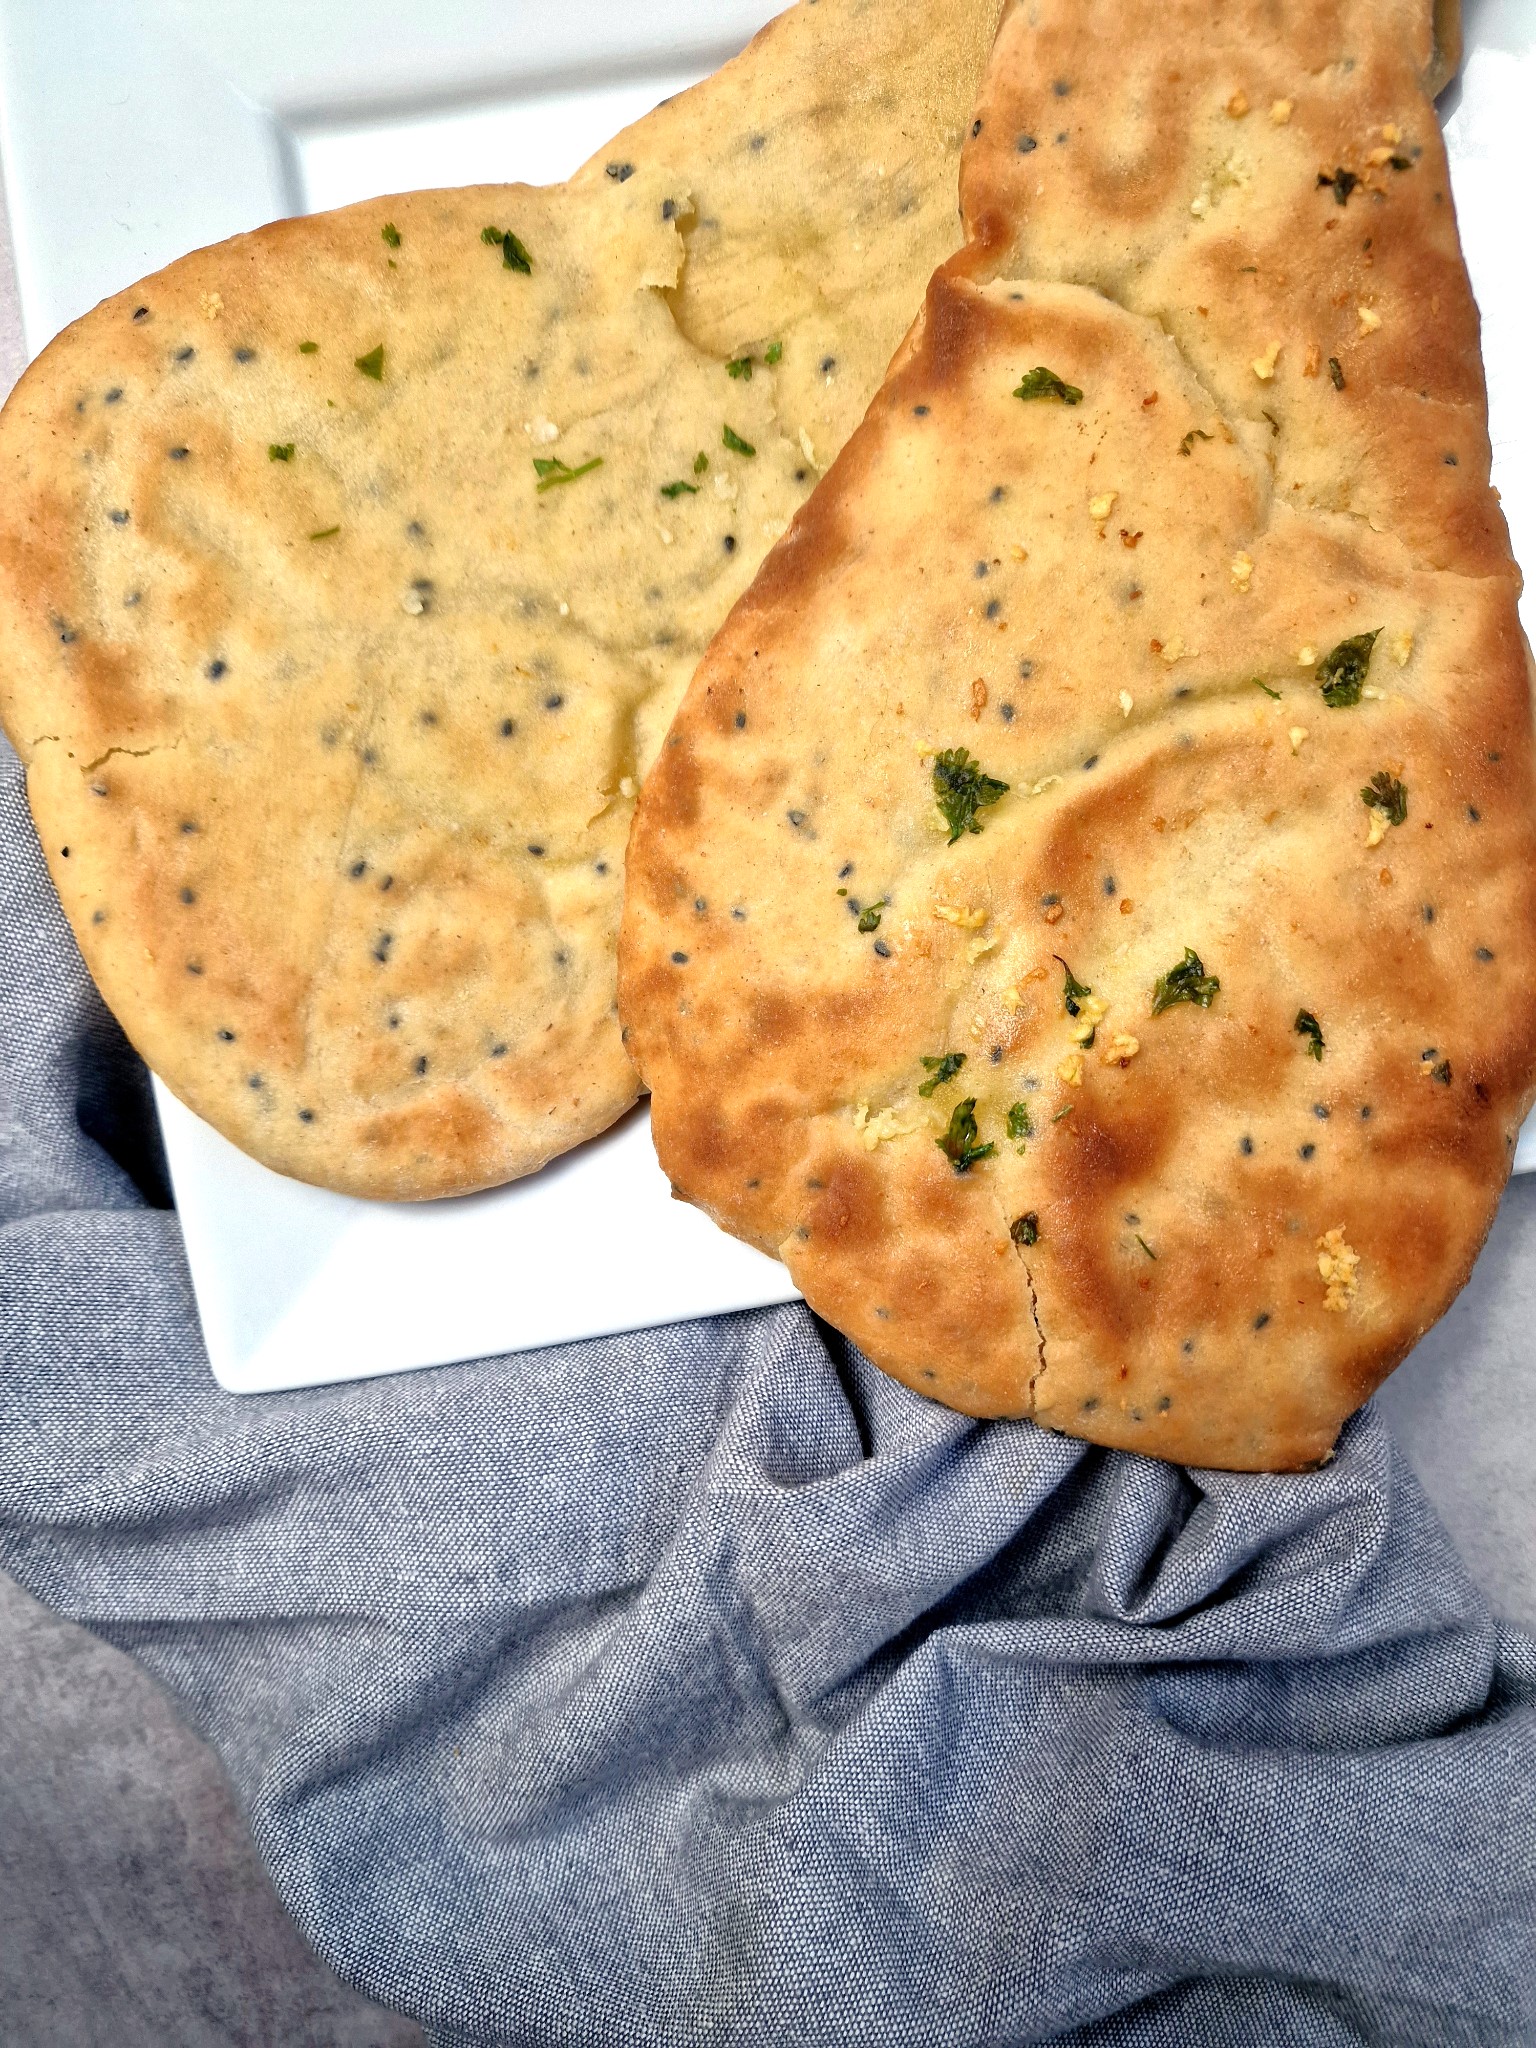 Finished naan bread on plate